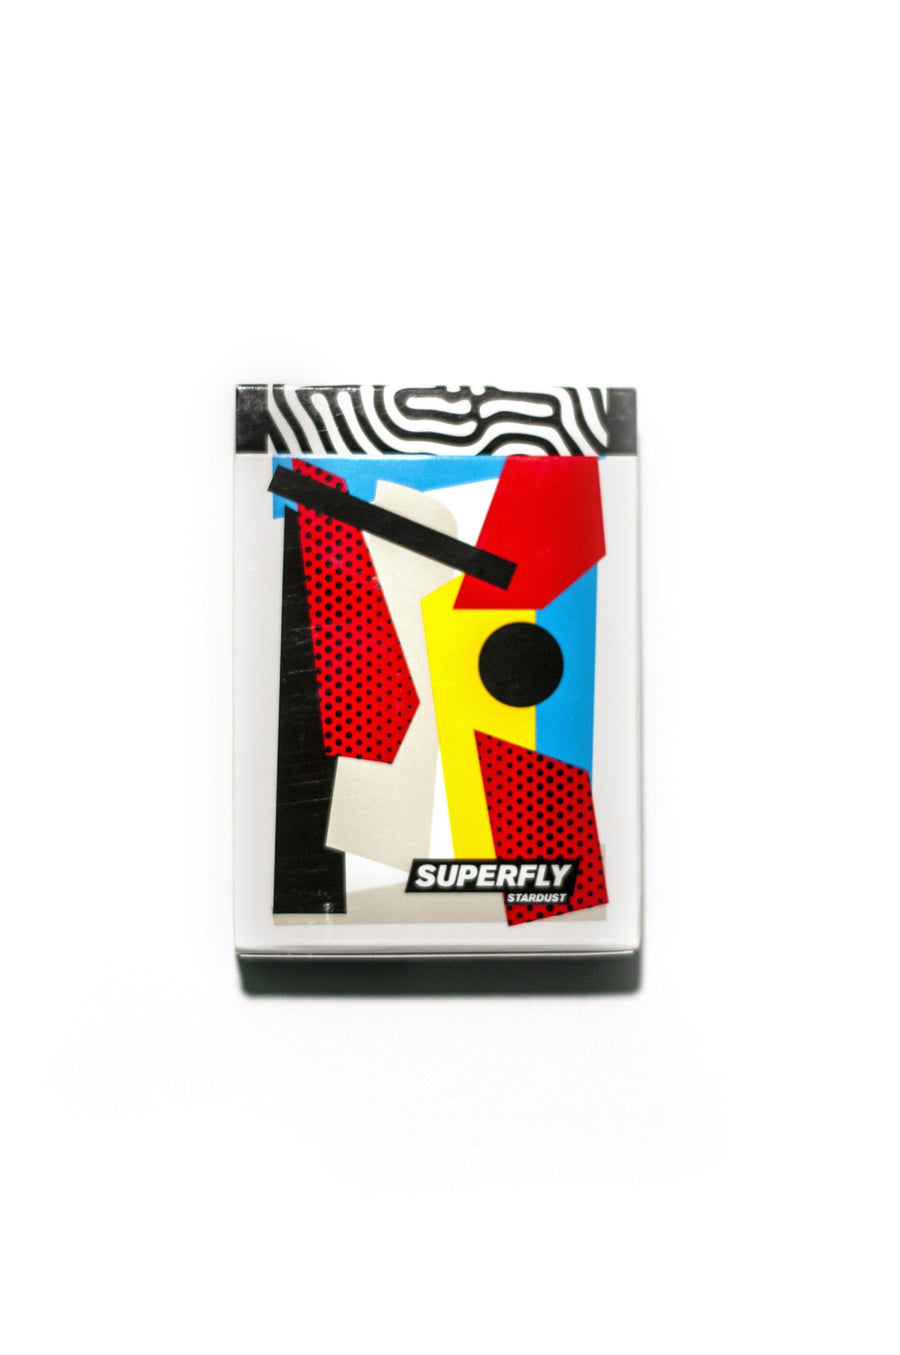 Superfly Stardust Playing Cards by Gemini